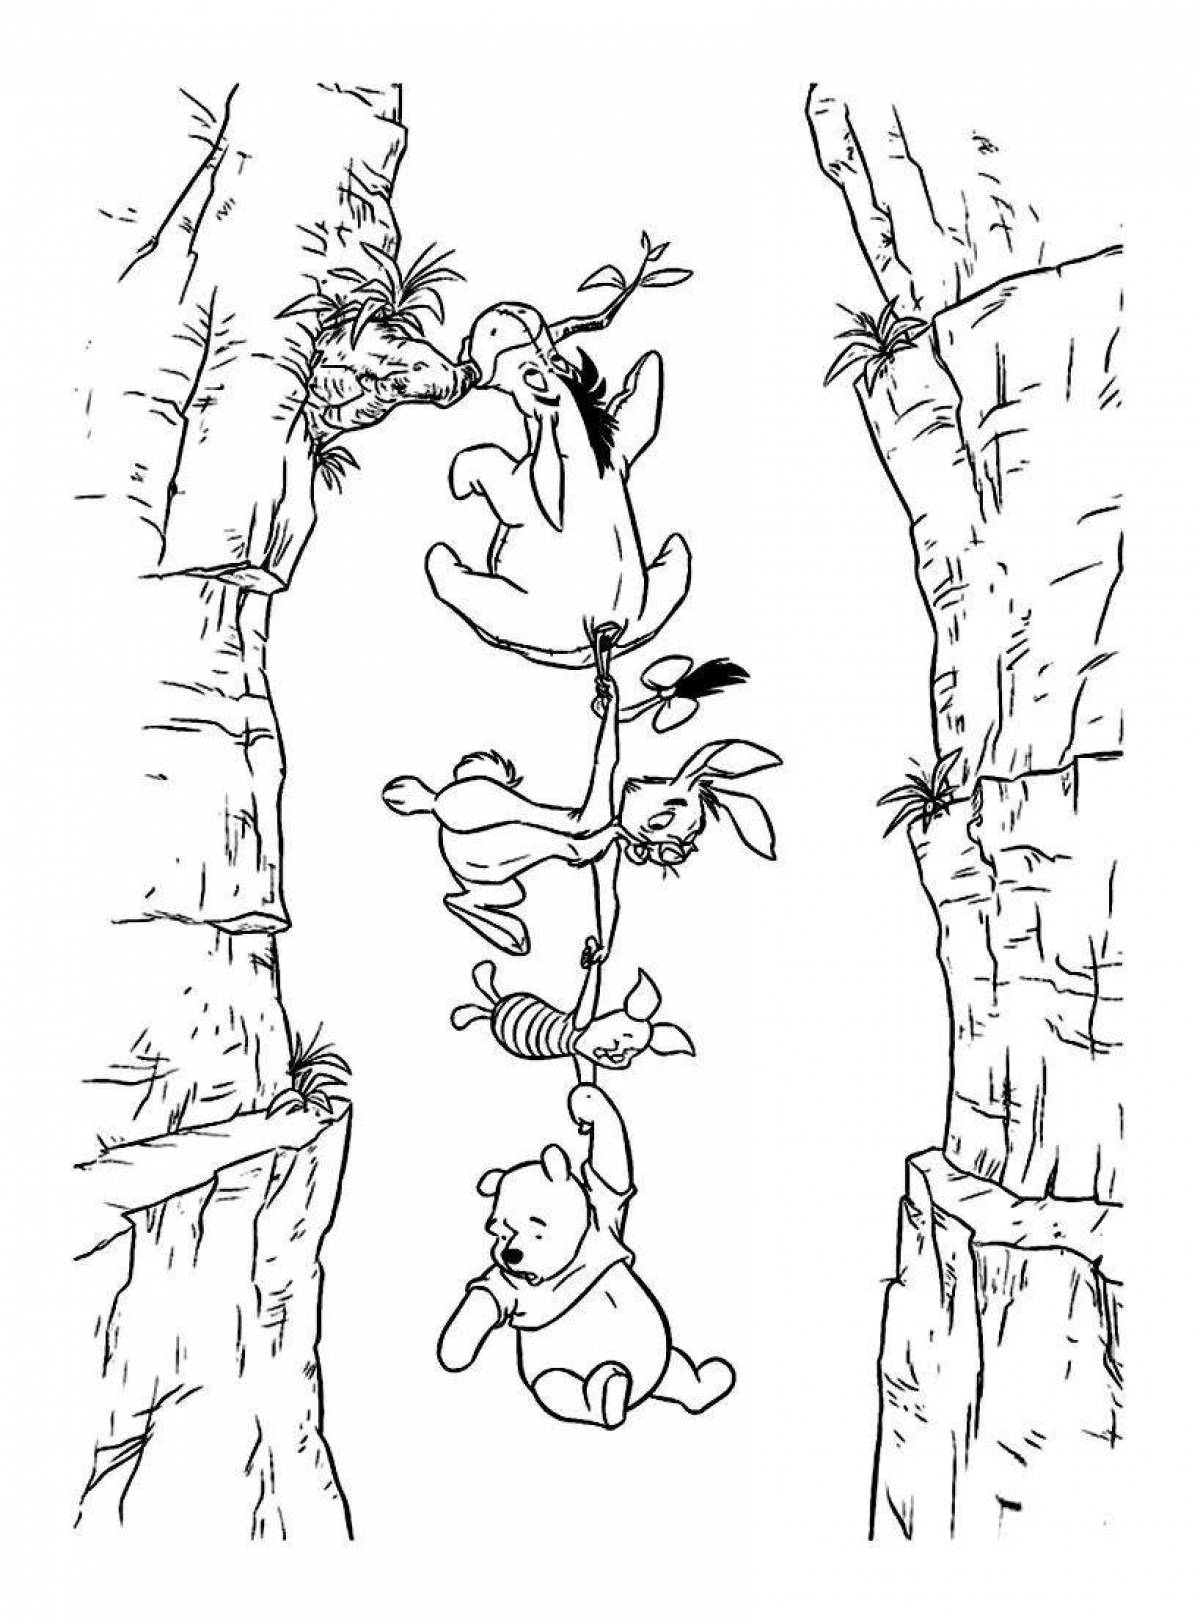 Winnie the pooh and friends holiday coloring book